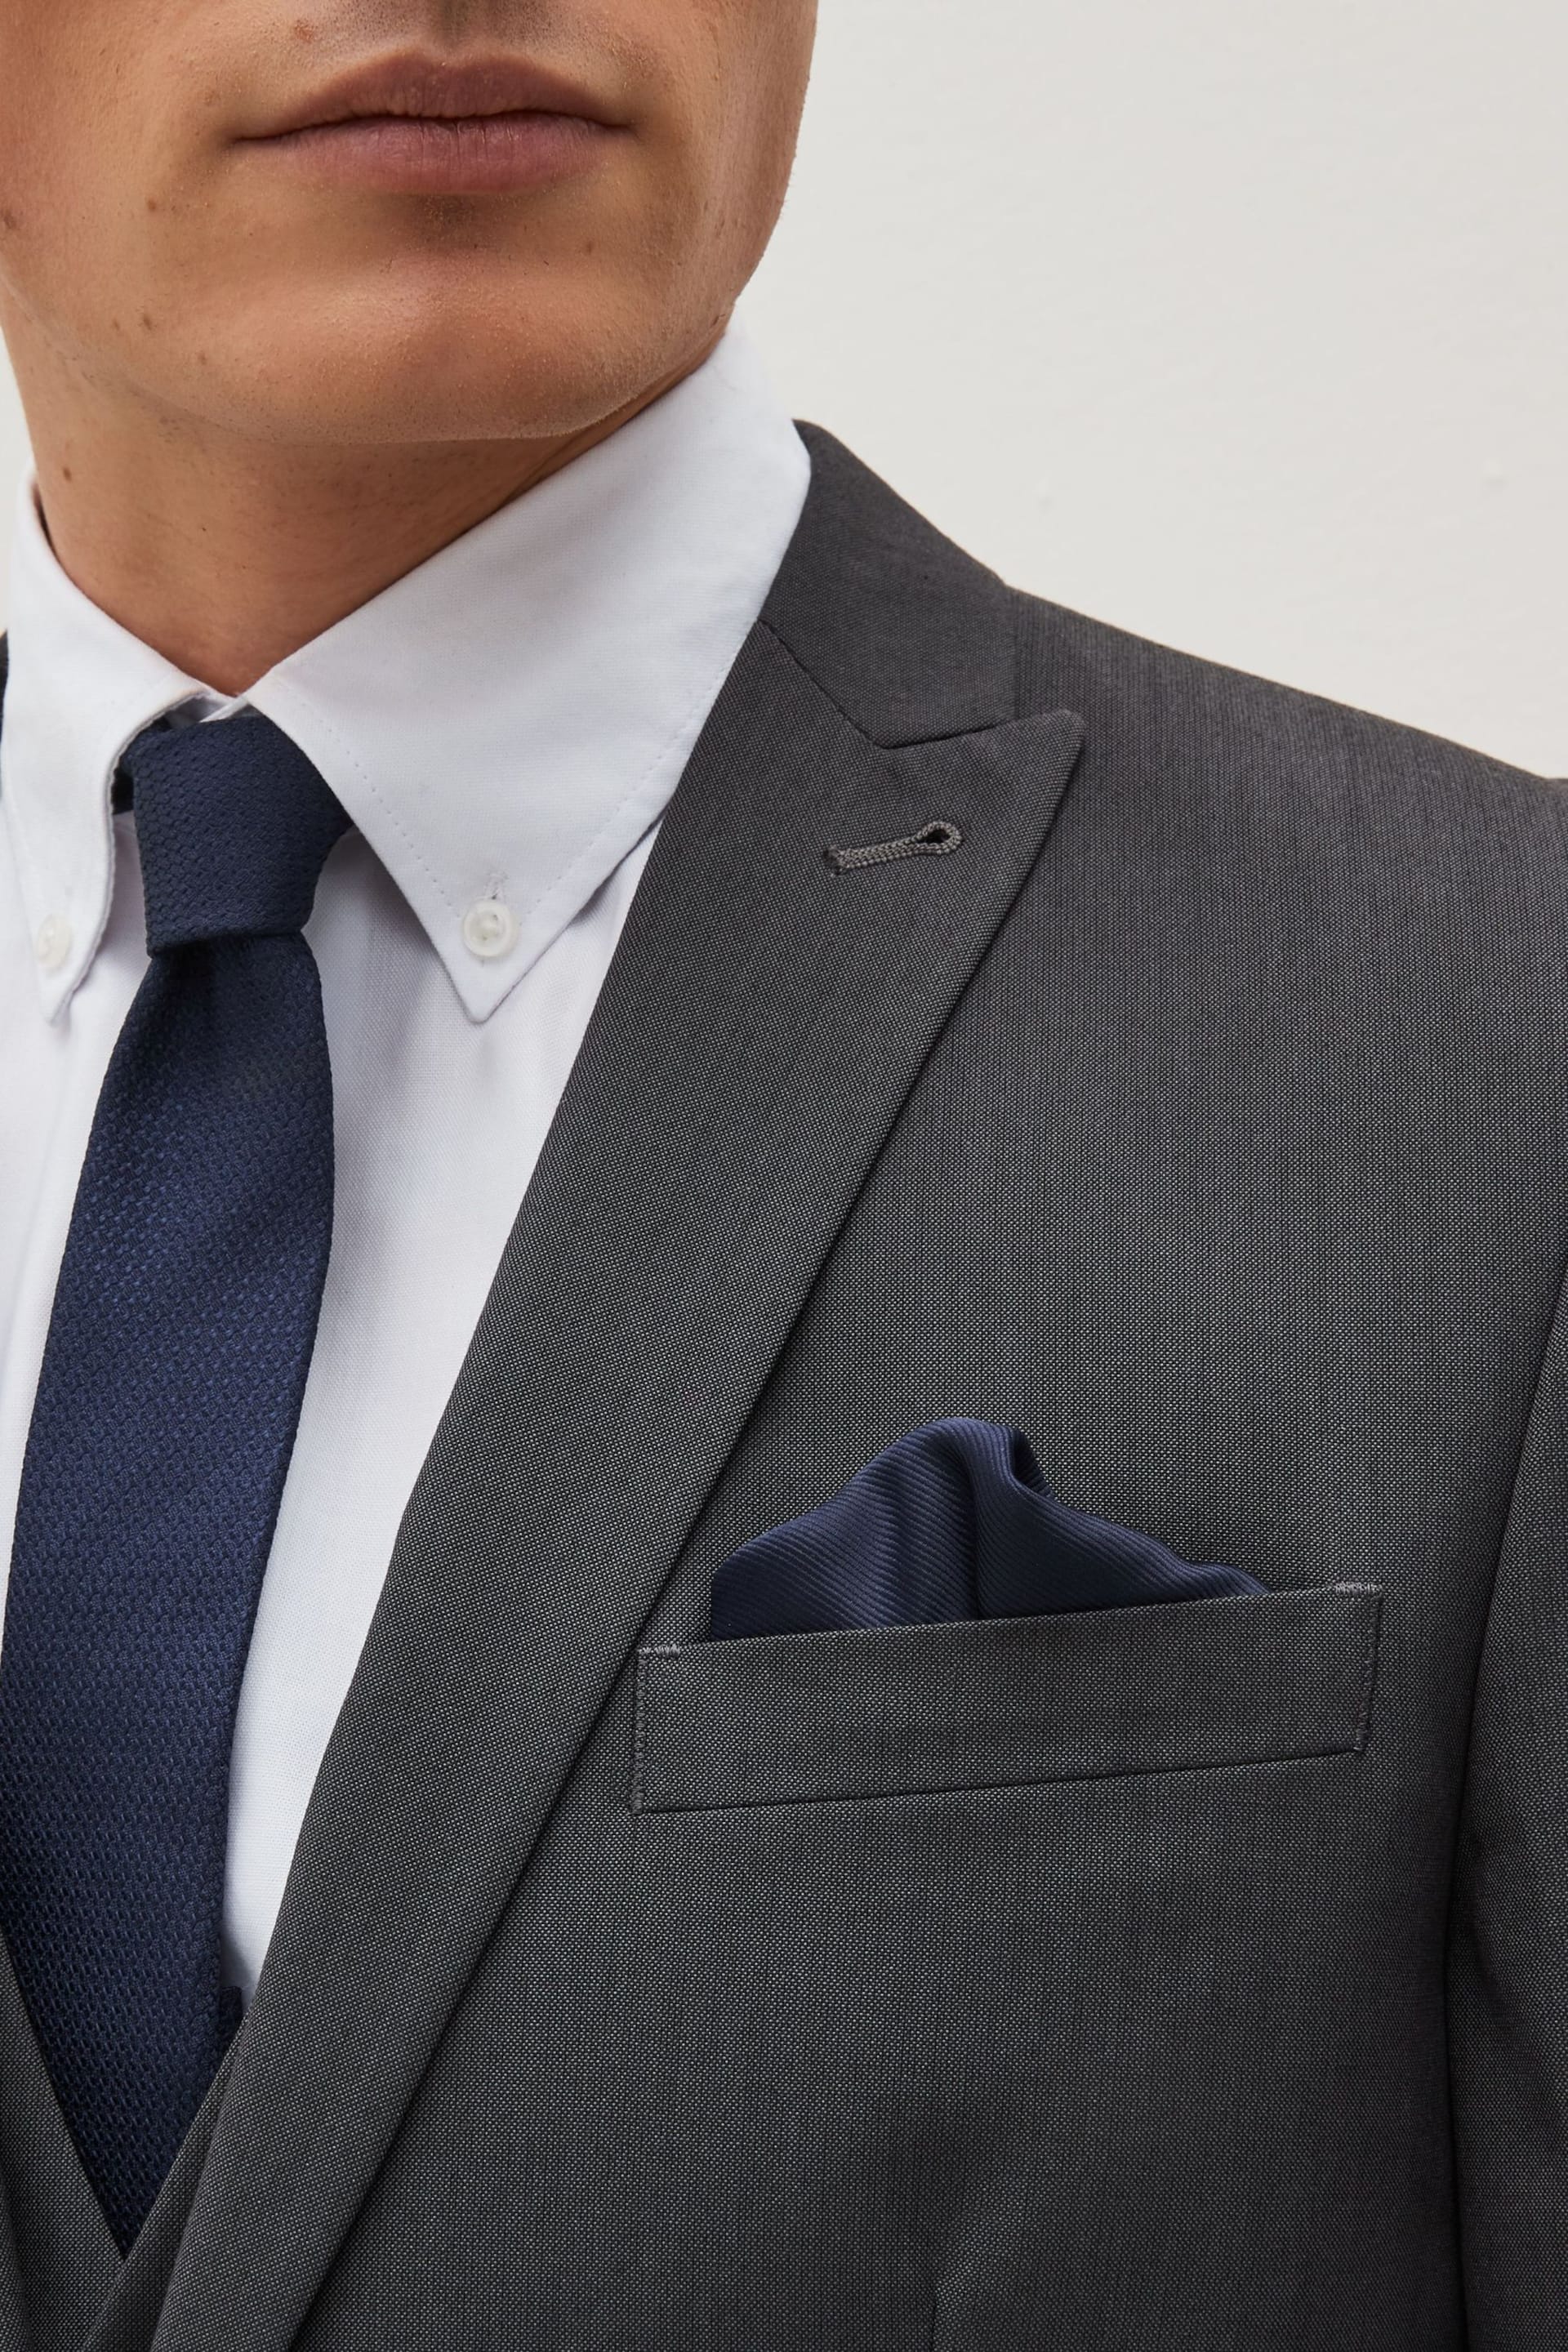 Navy Blue Recycled Polyester Twill Pocket Square - Image 1 of 3